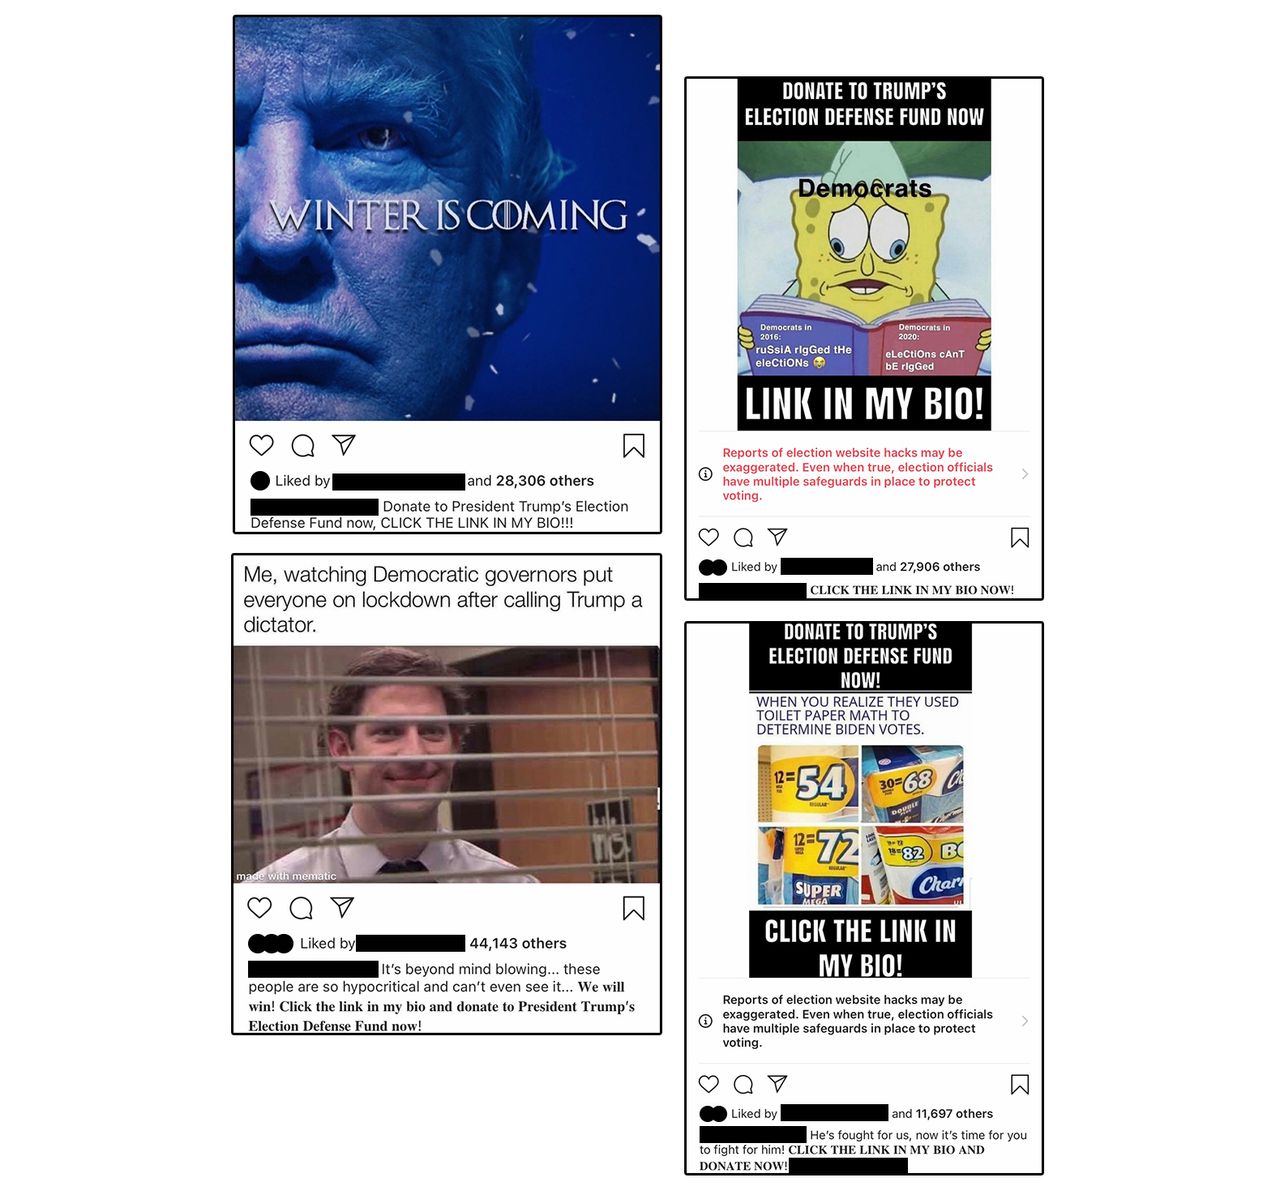 Shortly after the 2020 election, memers shared a deluge of synchronous posts urging their followers to donate to Trump's "Election Defense Fund" via the links in their bios.